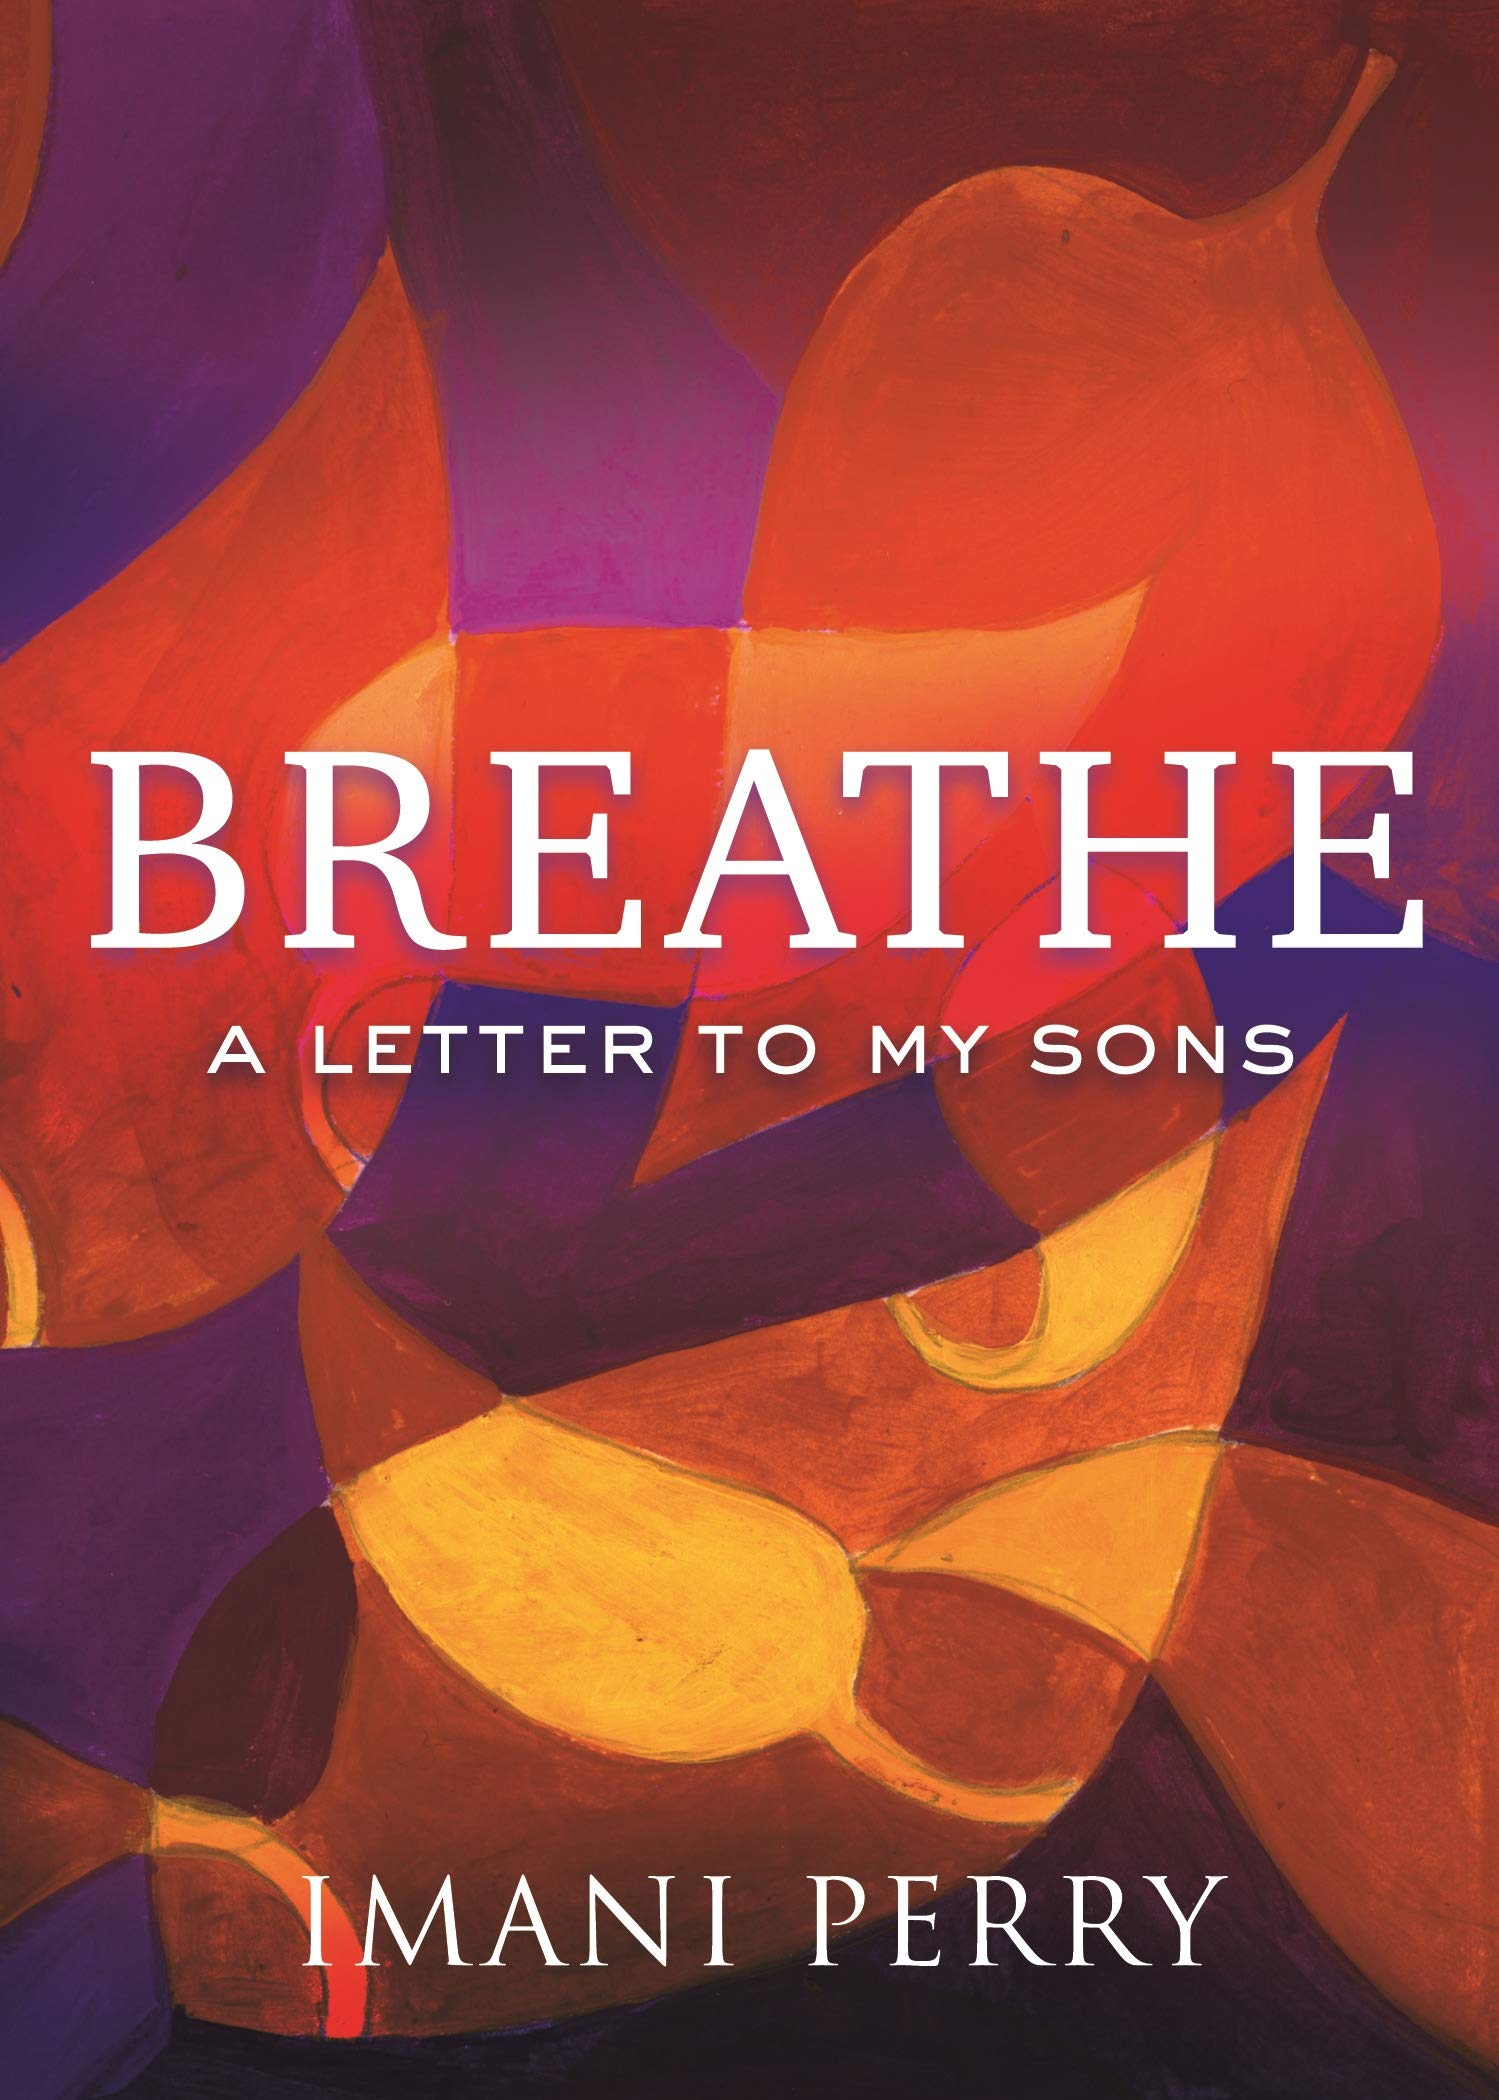 Image of the cover of Breathe: A Letter to My Sons (Beacon Press, 2019) by Imani Perry